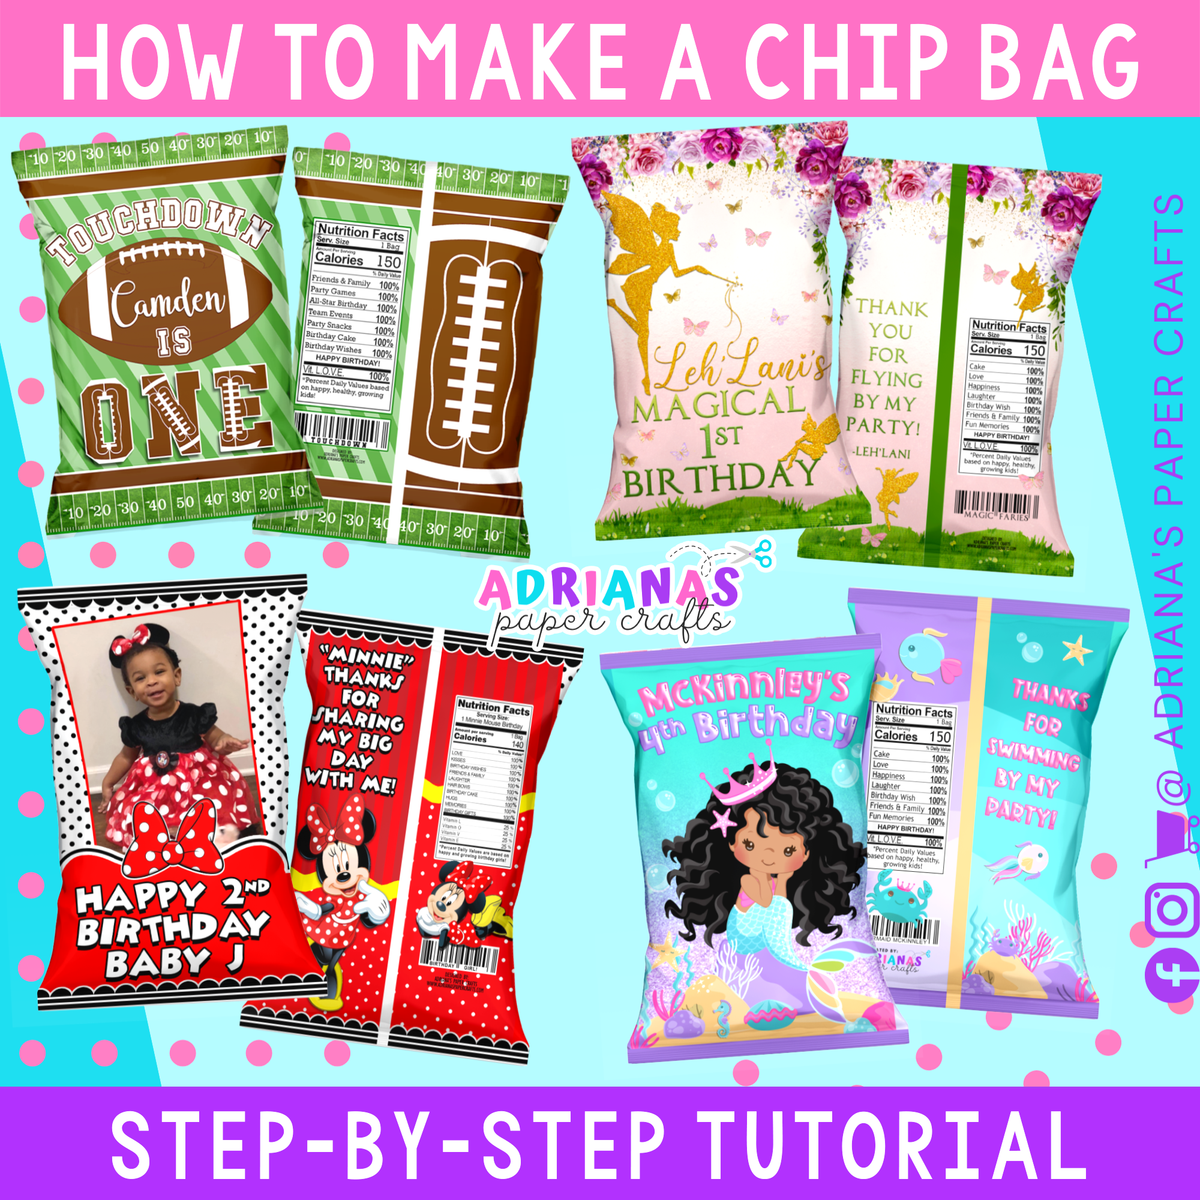 Editable The big one Chip Bag Wrapper